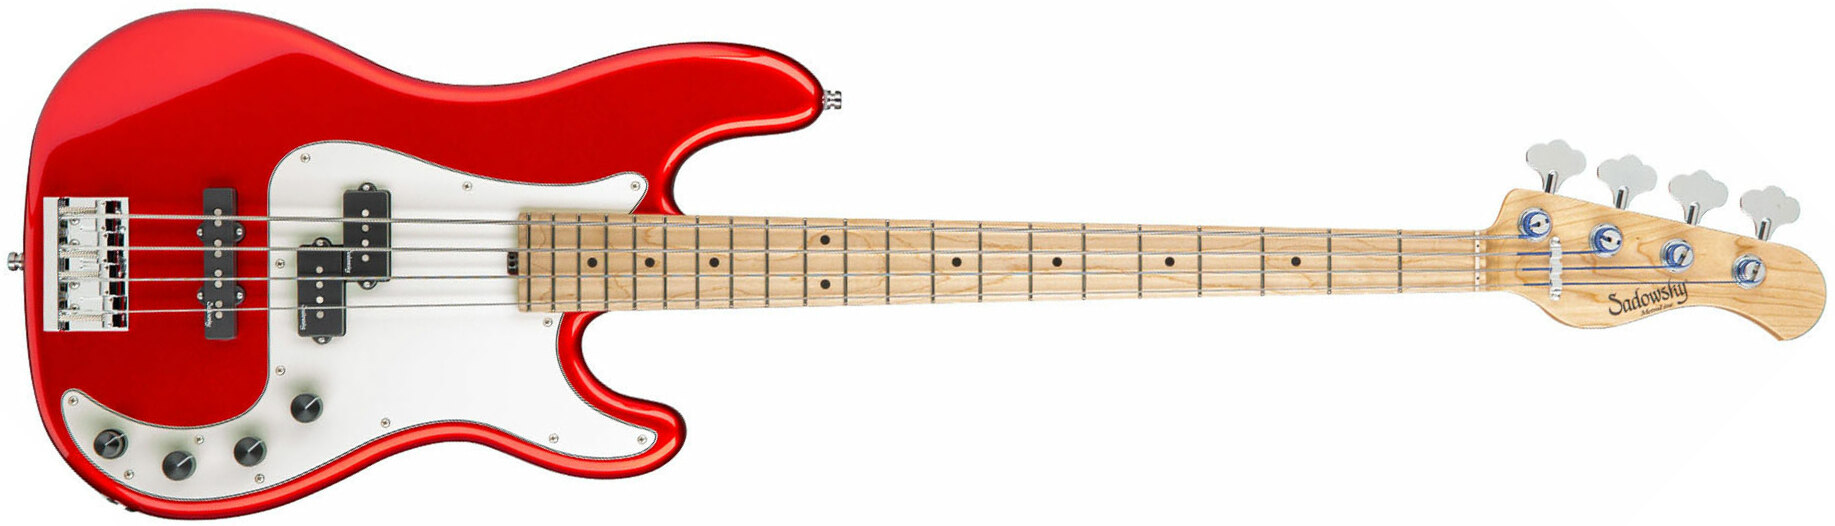 Sadowsky Hybrid P/j Bass 21 Fret Ash 4c Metroline All Active Mn - Solid Candy Apple Red - Solid body elektrische bas - Main picture